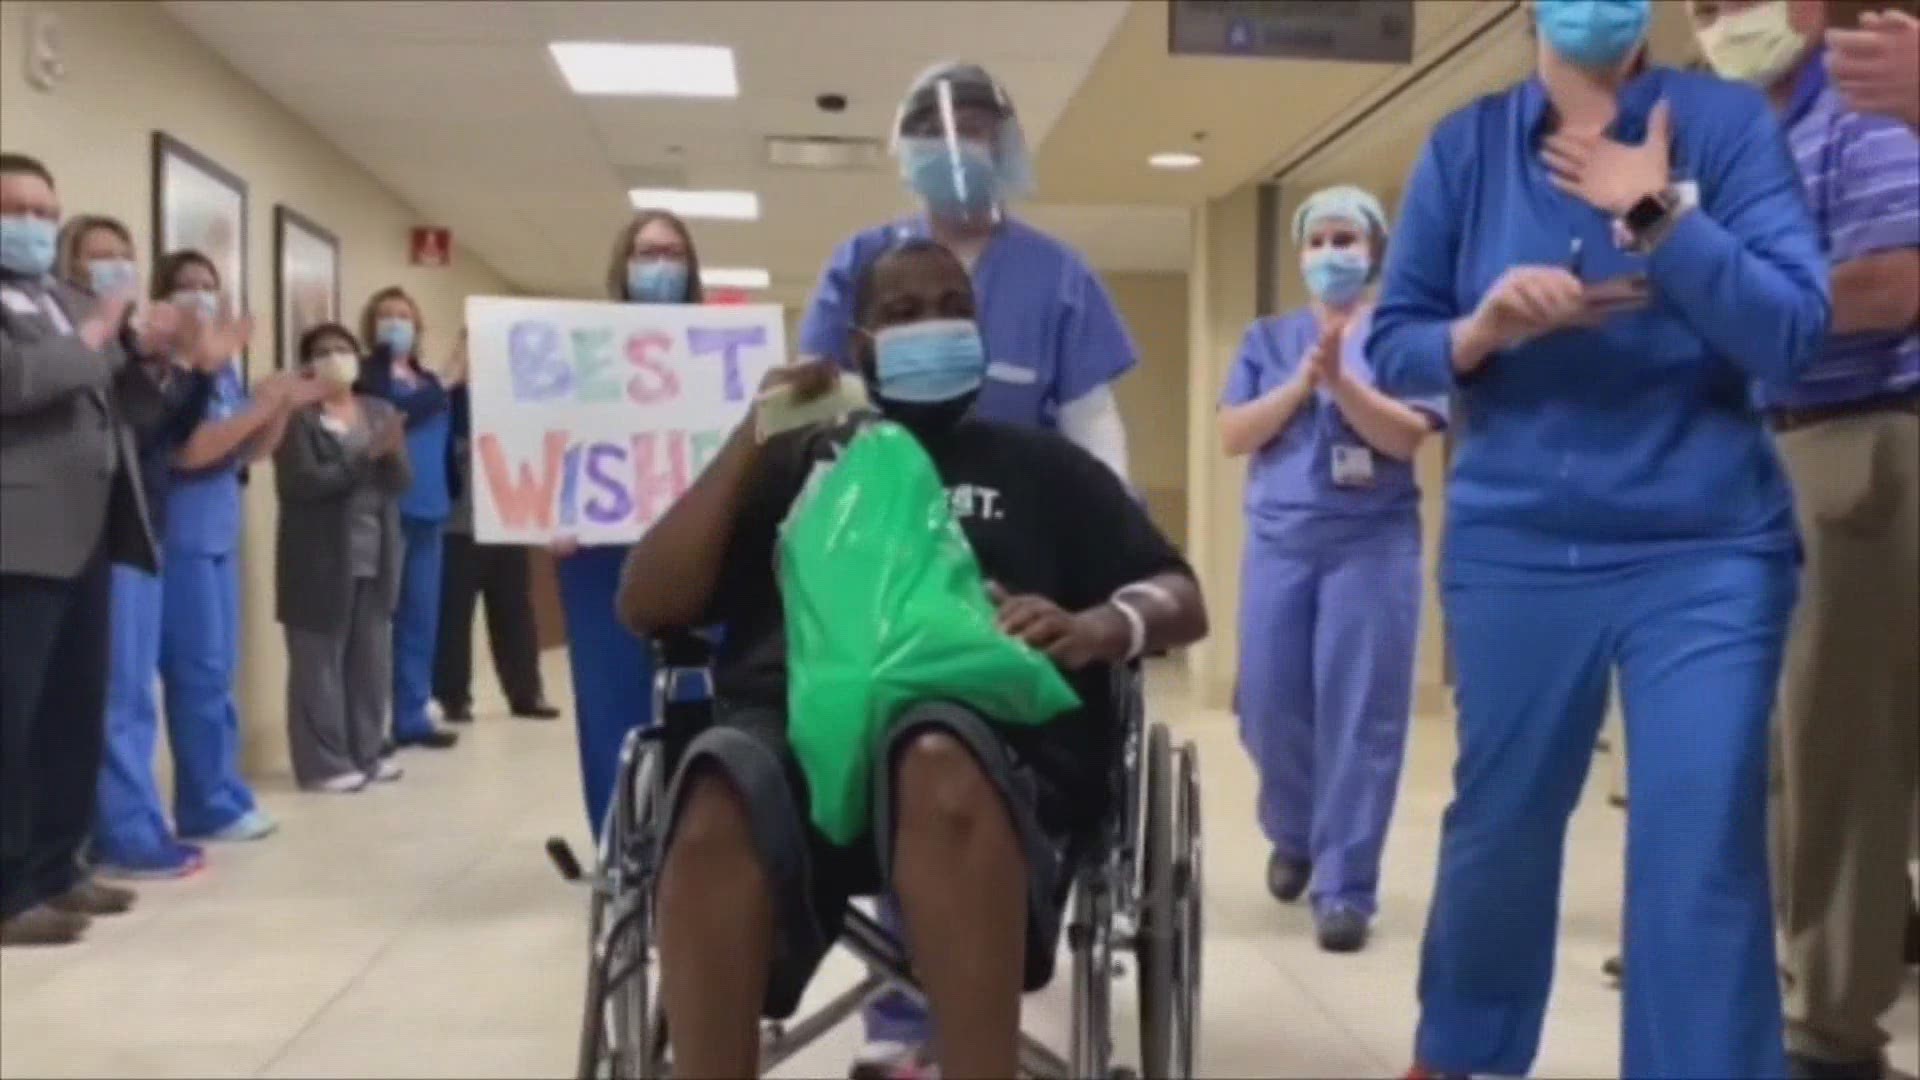 He is 37 and diabetic. After three weeks on life support, Christopher Marshall got to go home.